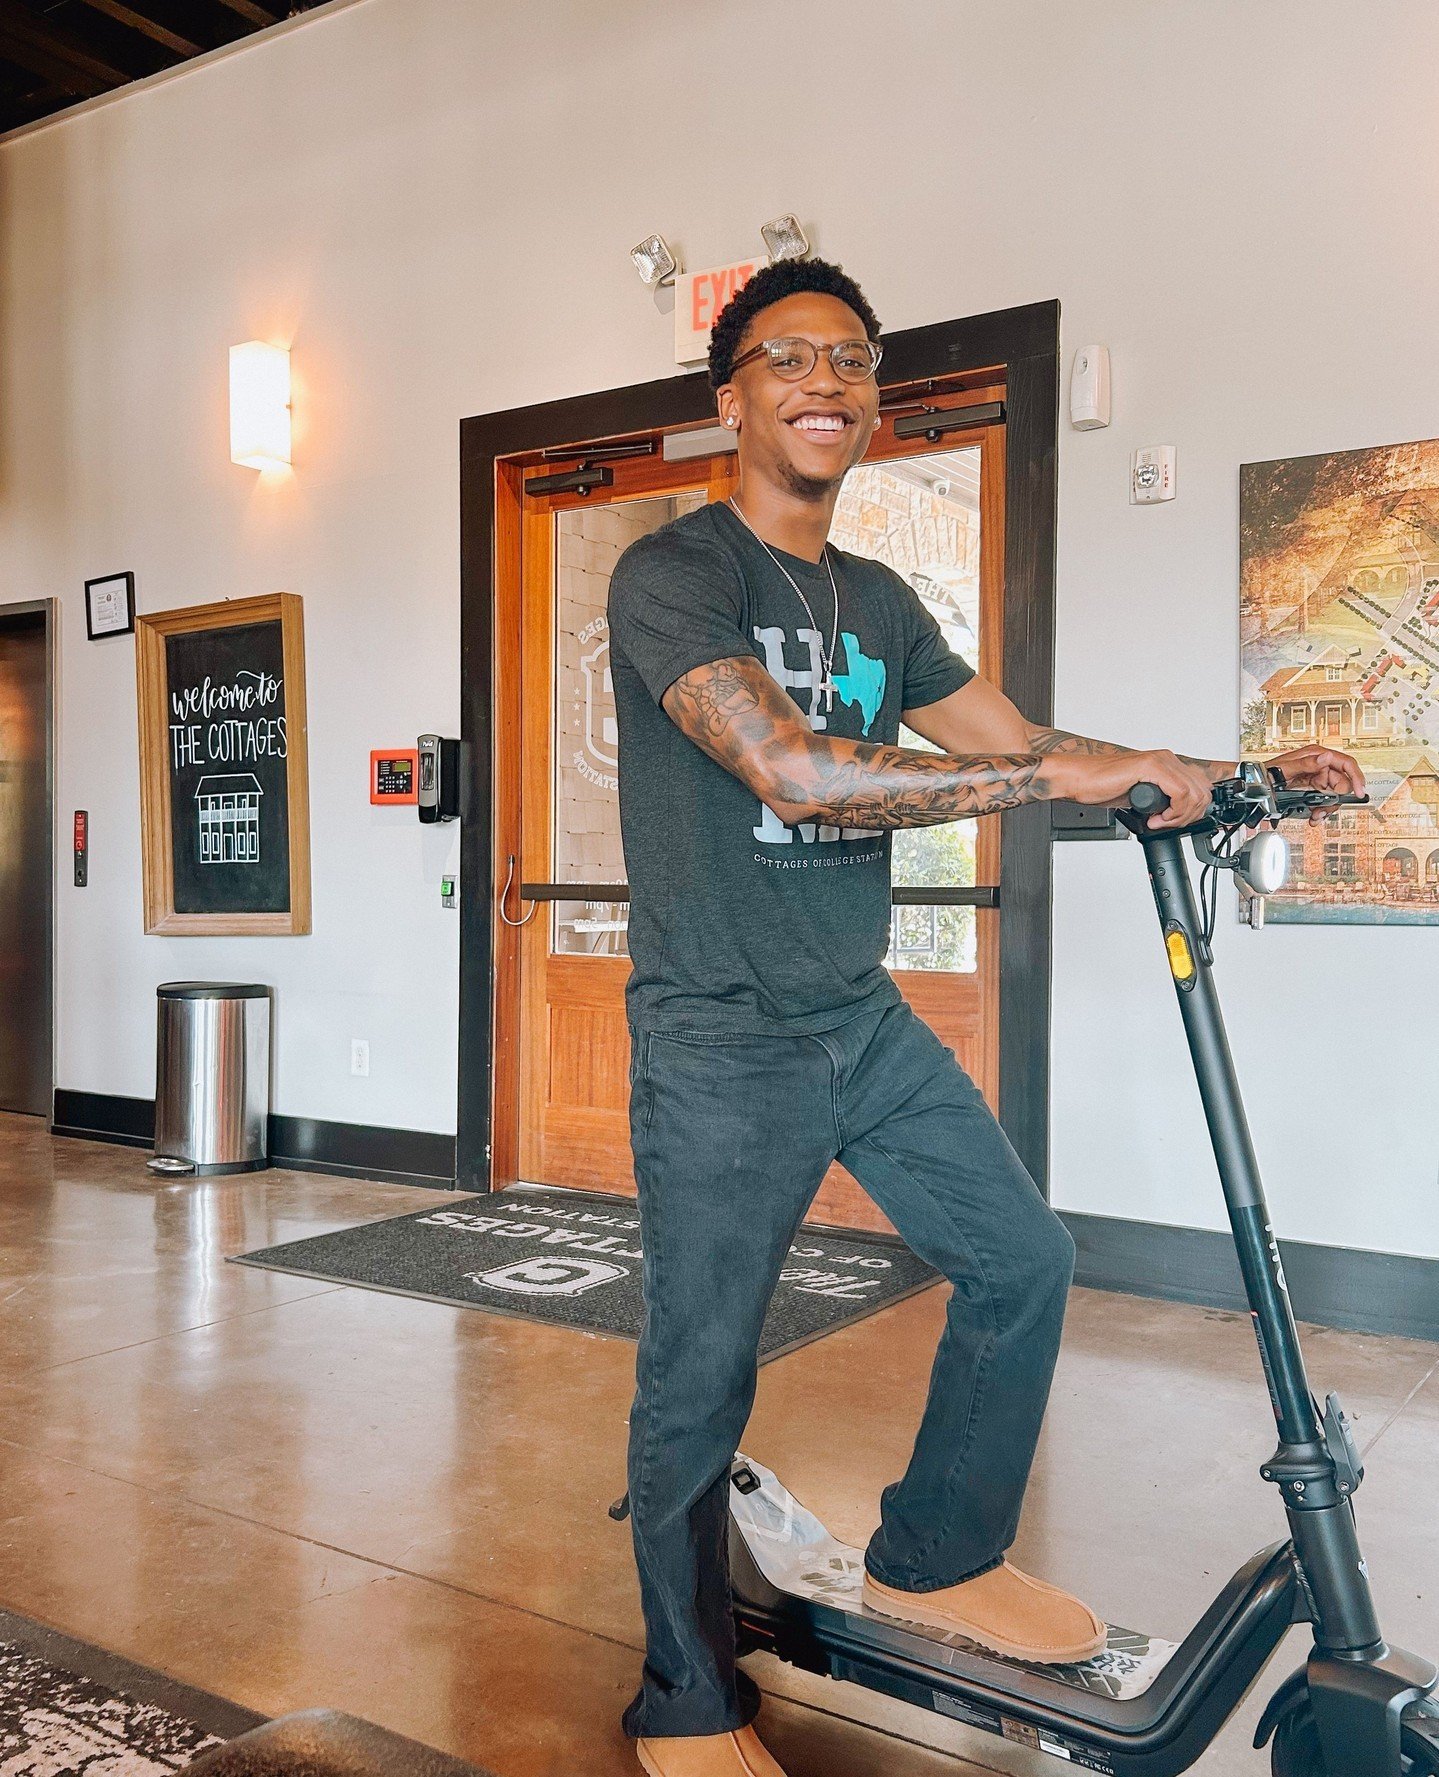 ITS TIMEEEE!!!!!🥳🥳⁠
⁠
Want this super cool scooter? All you have to do is comment what you would use it for and tag your friends! 🛴 ⁠
⁠
There is still time to renew and if you renew you will get extra entries!! 🎟️